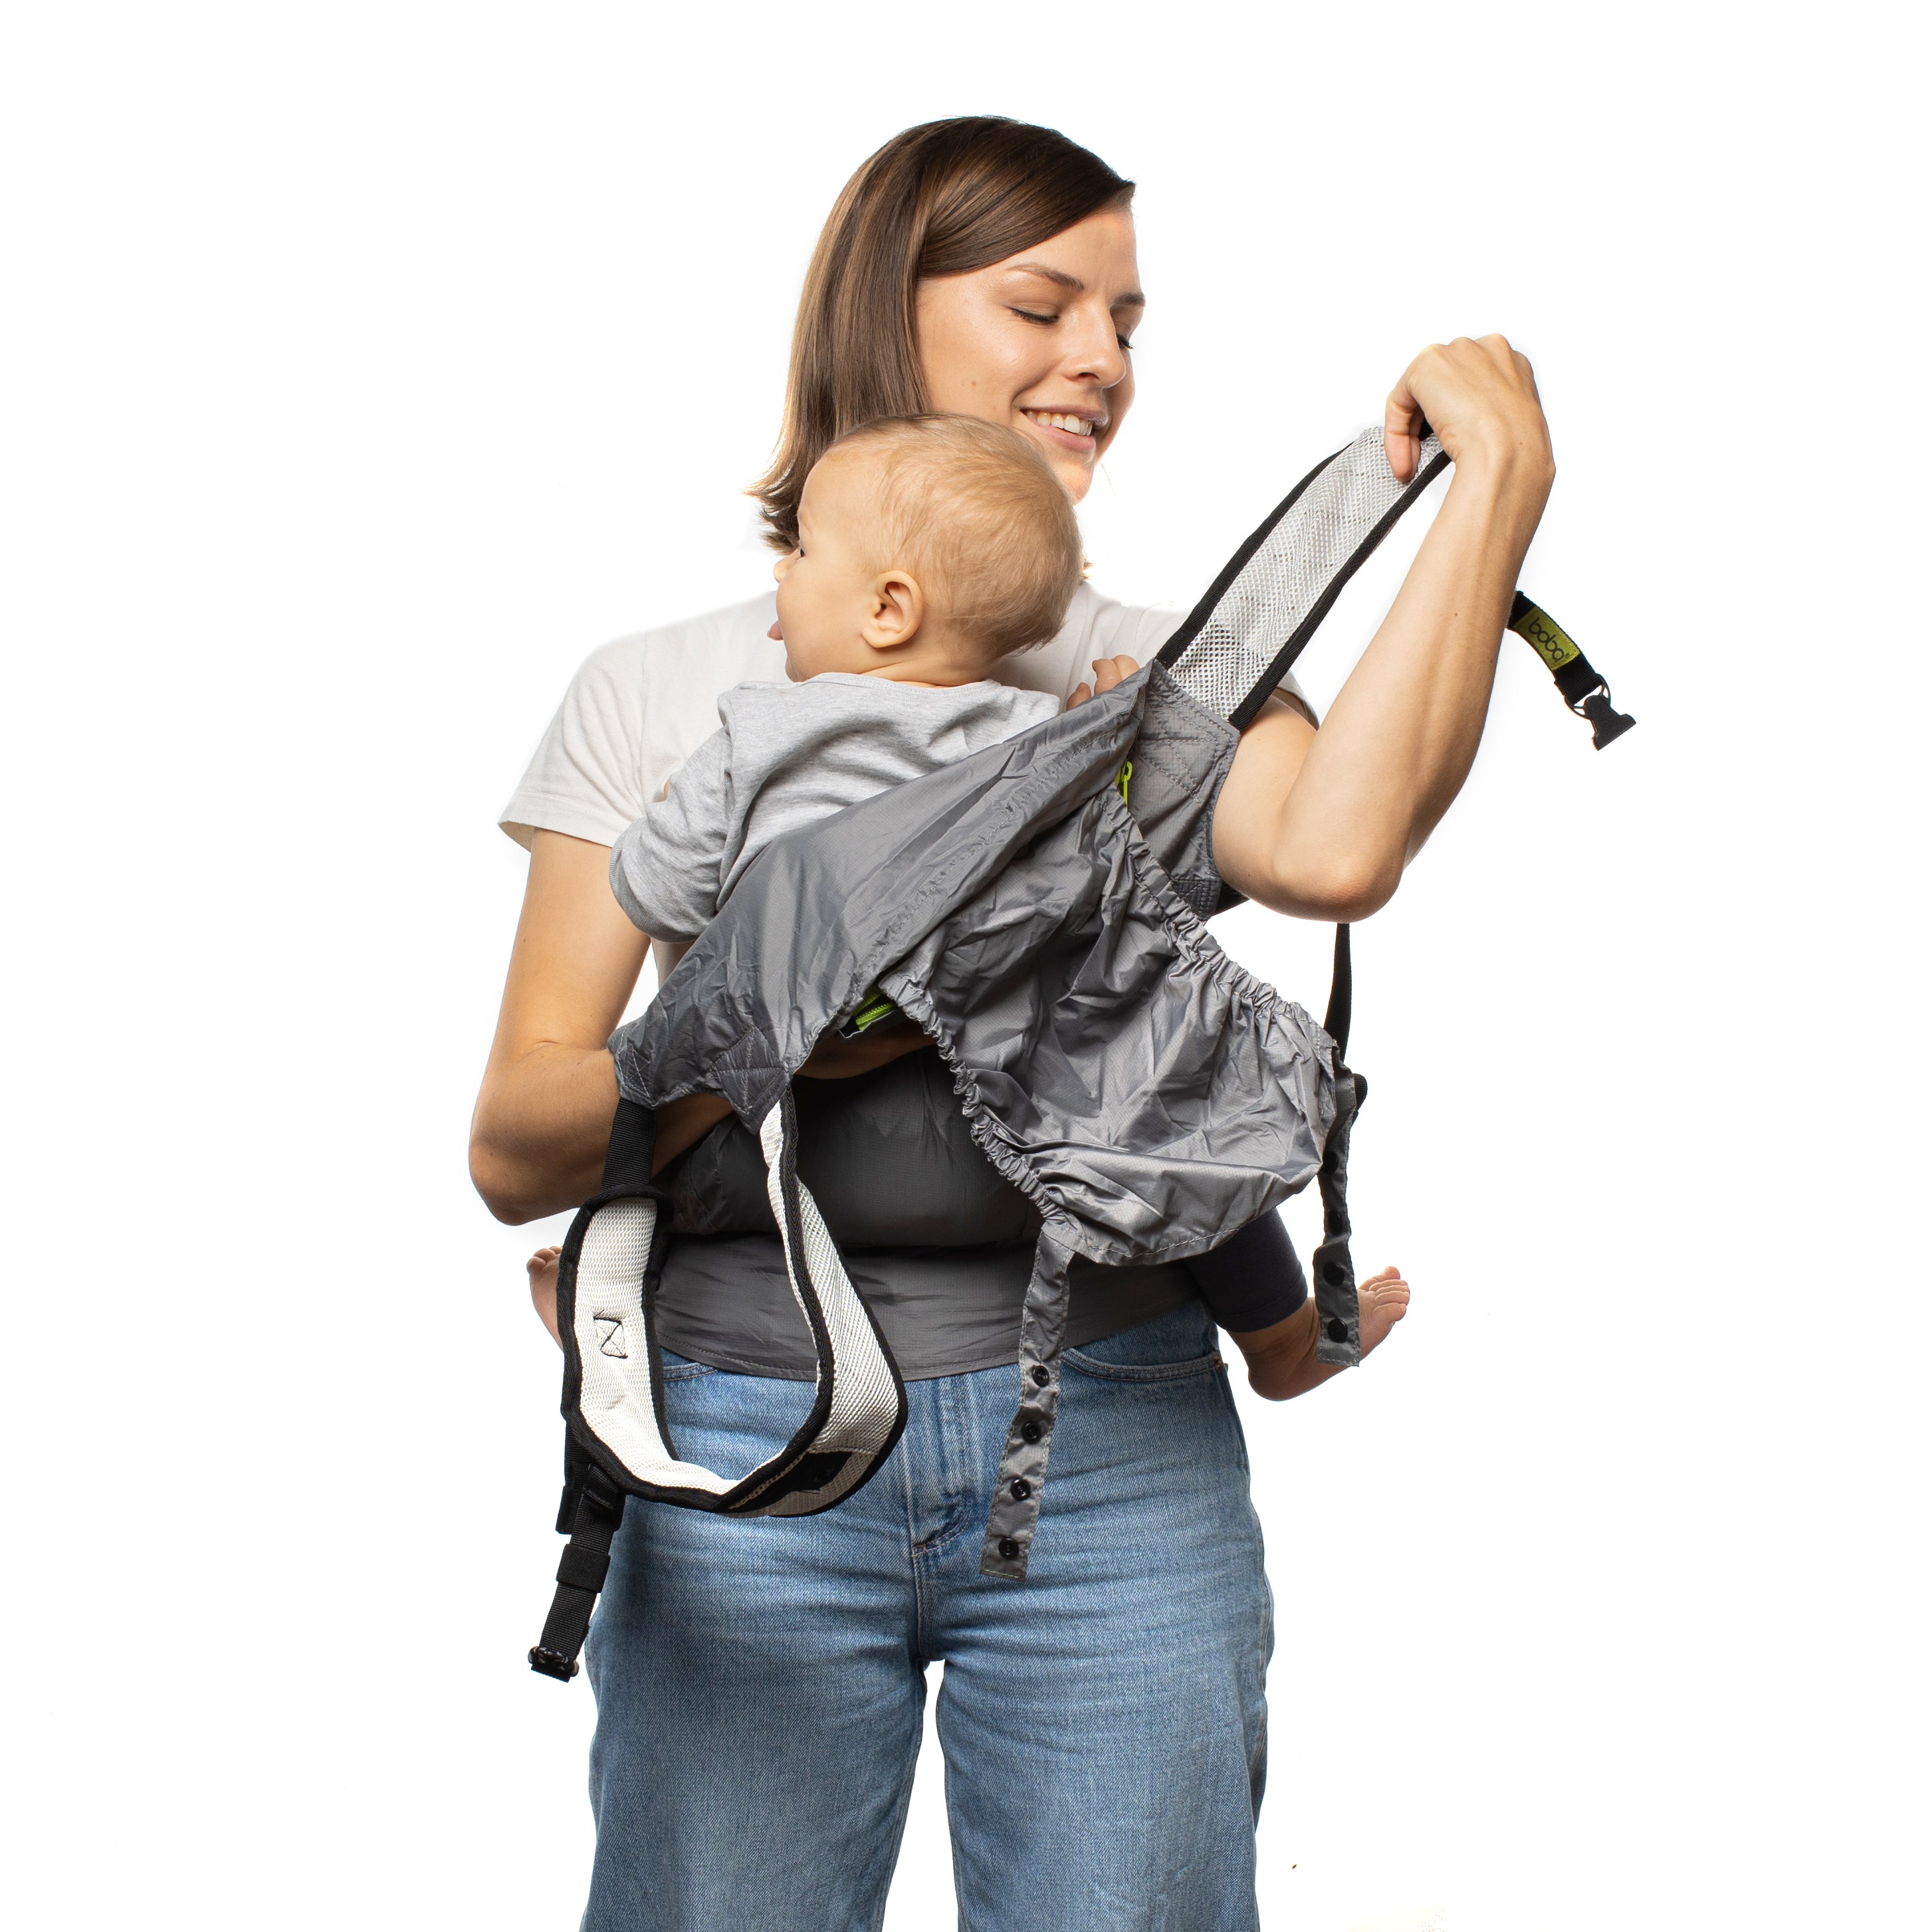 Mom putting her baby in a front carry position in the gray Boba Air baby carrier.